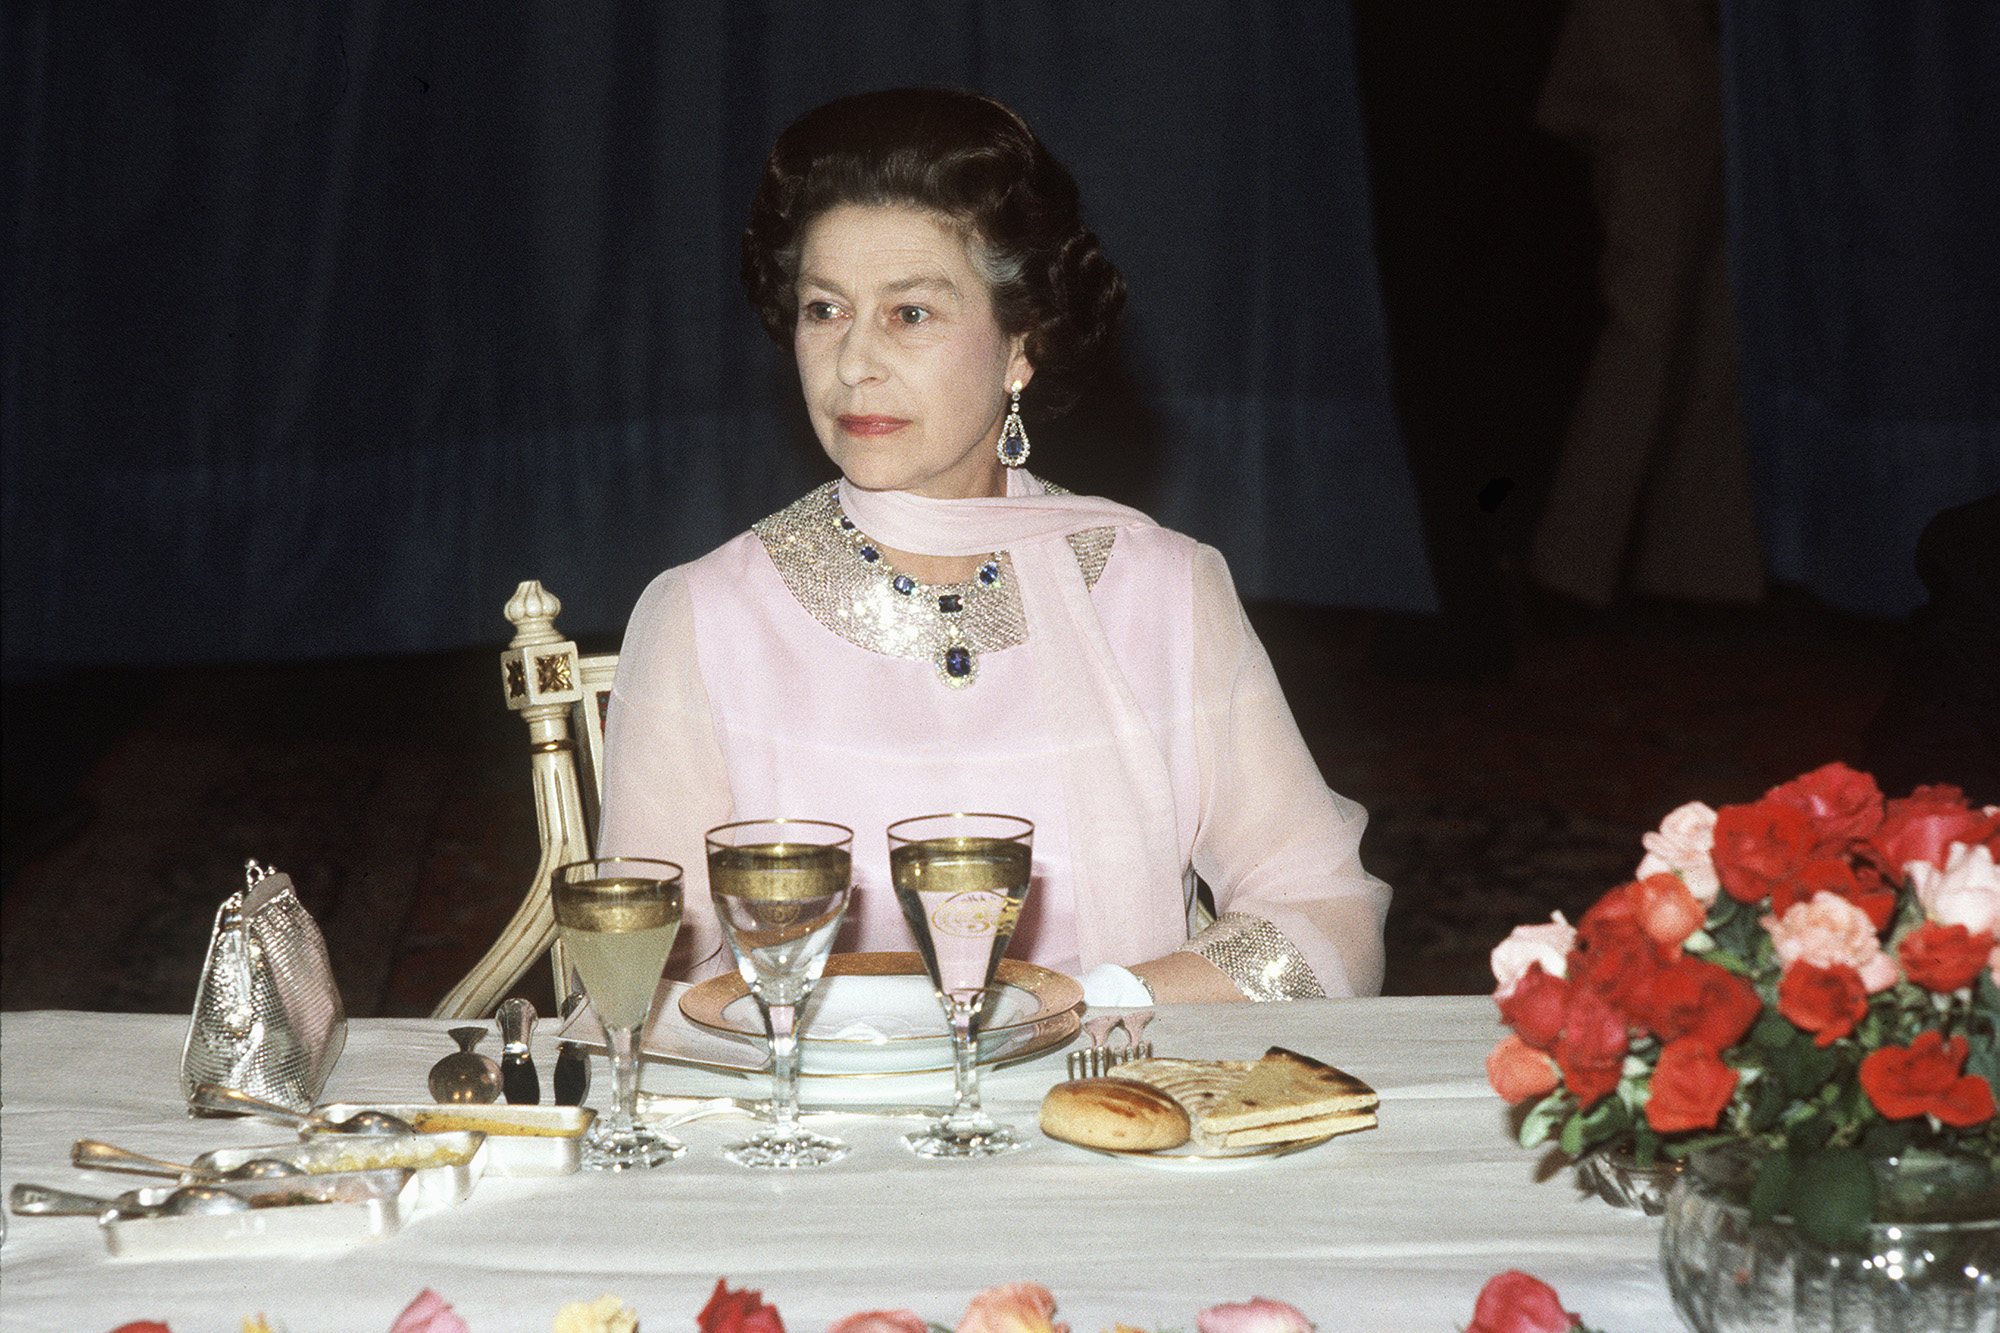 Queen Elizabeth II has the same meal every day since she was a toddler, her former private chef revealed.